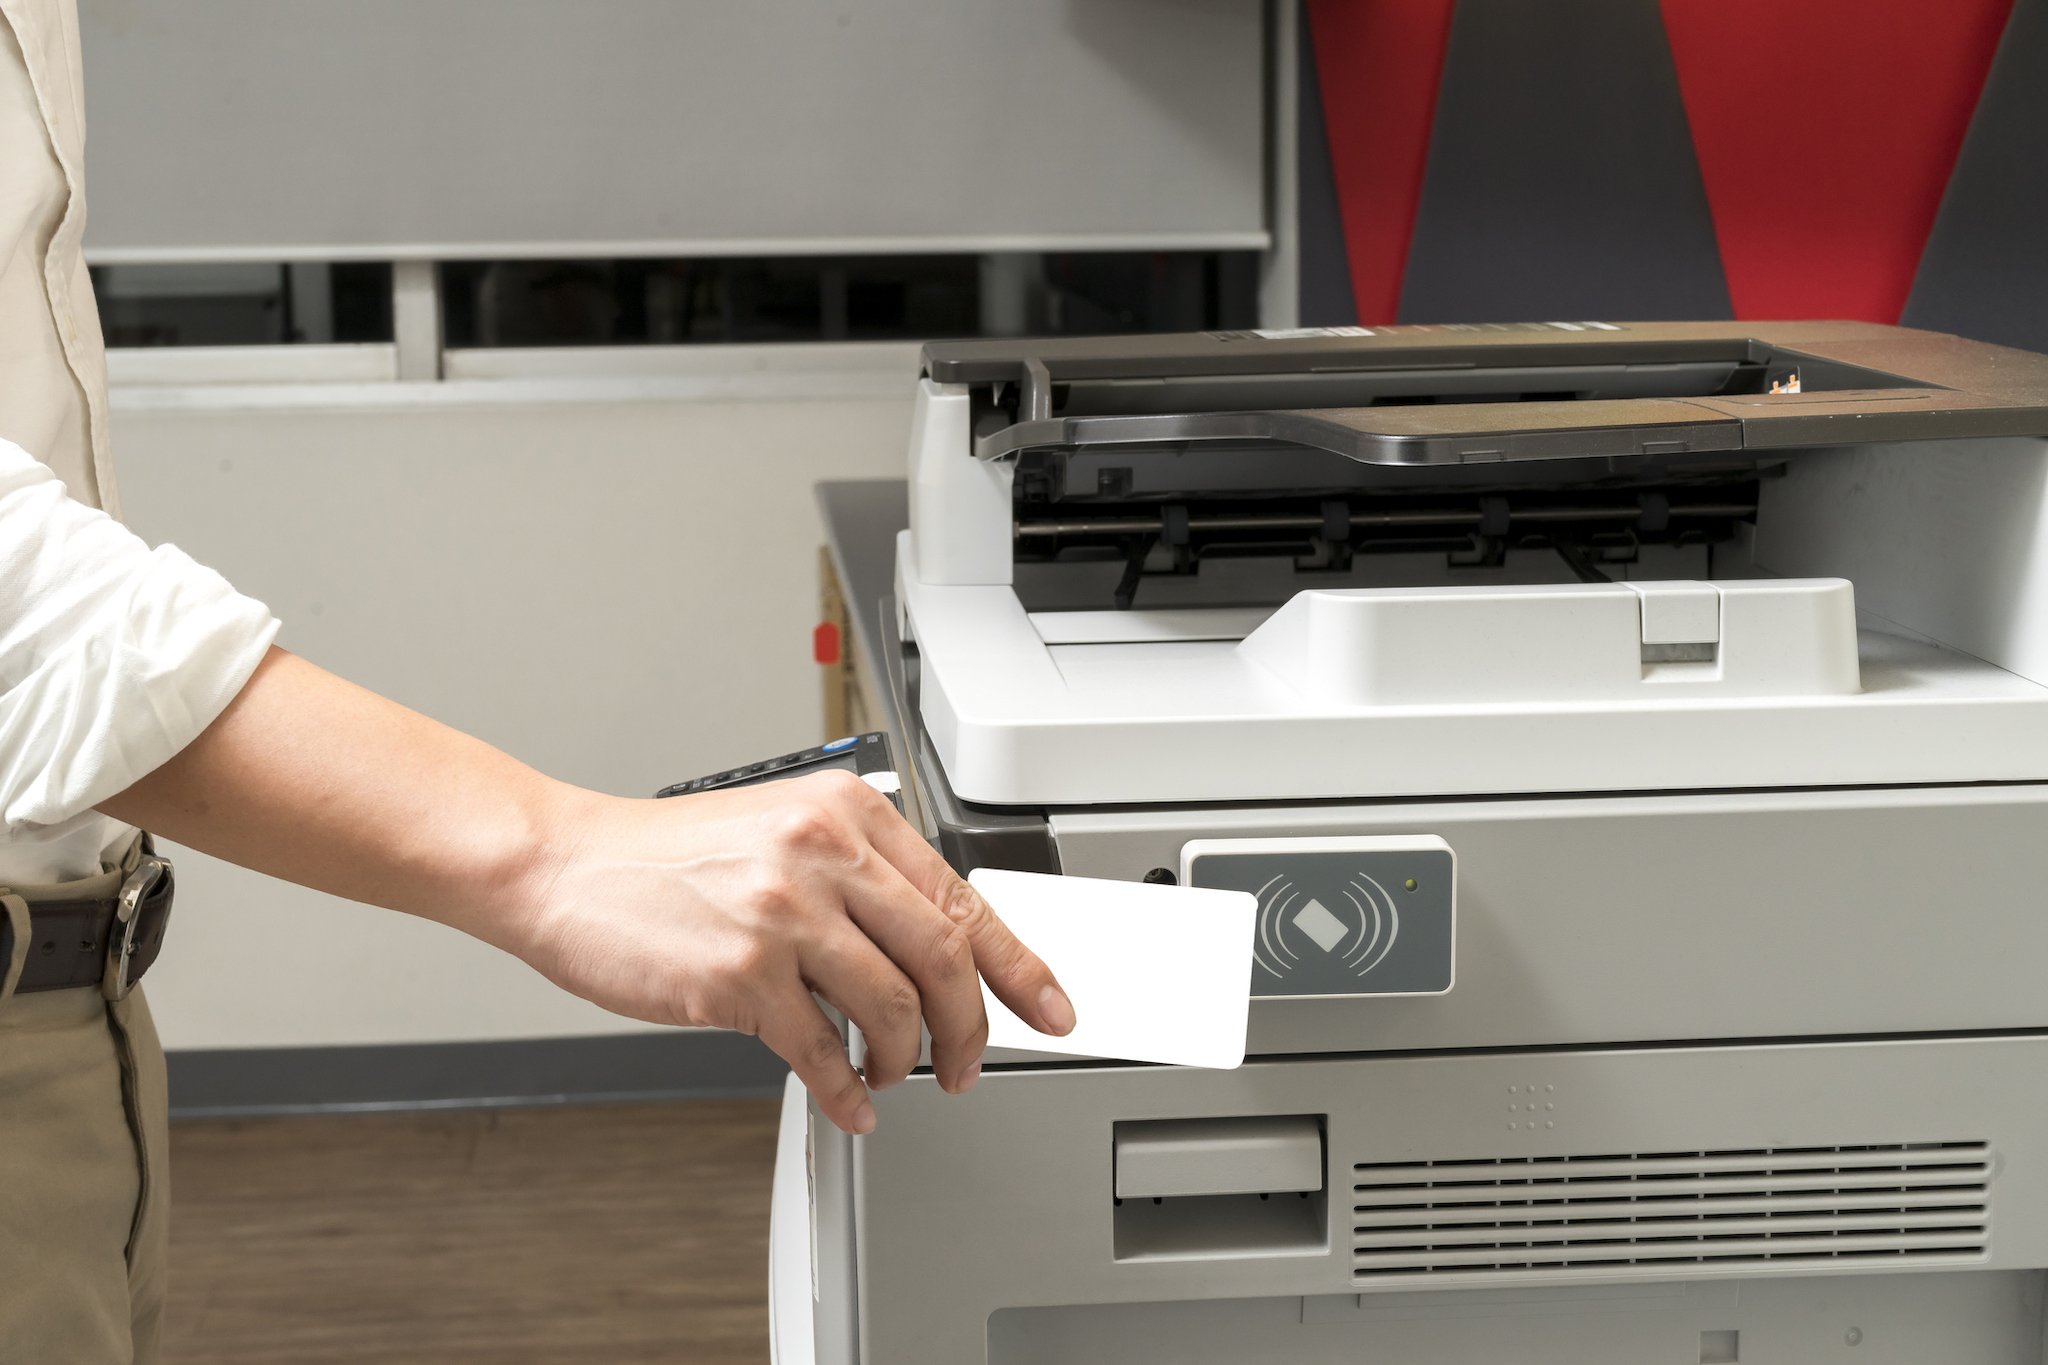 man hand hold card for scanning key card to access Photocopier . Security system concept